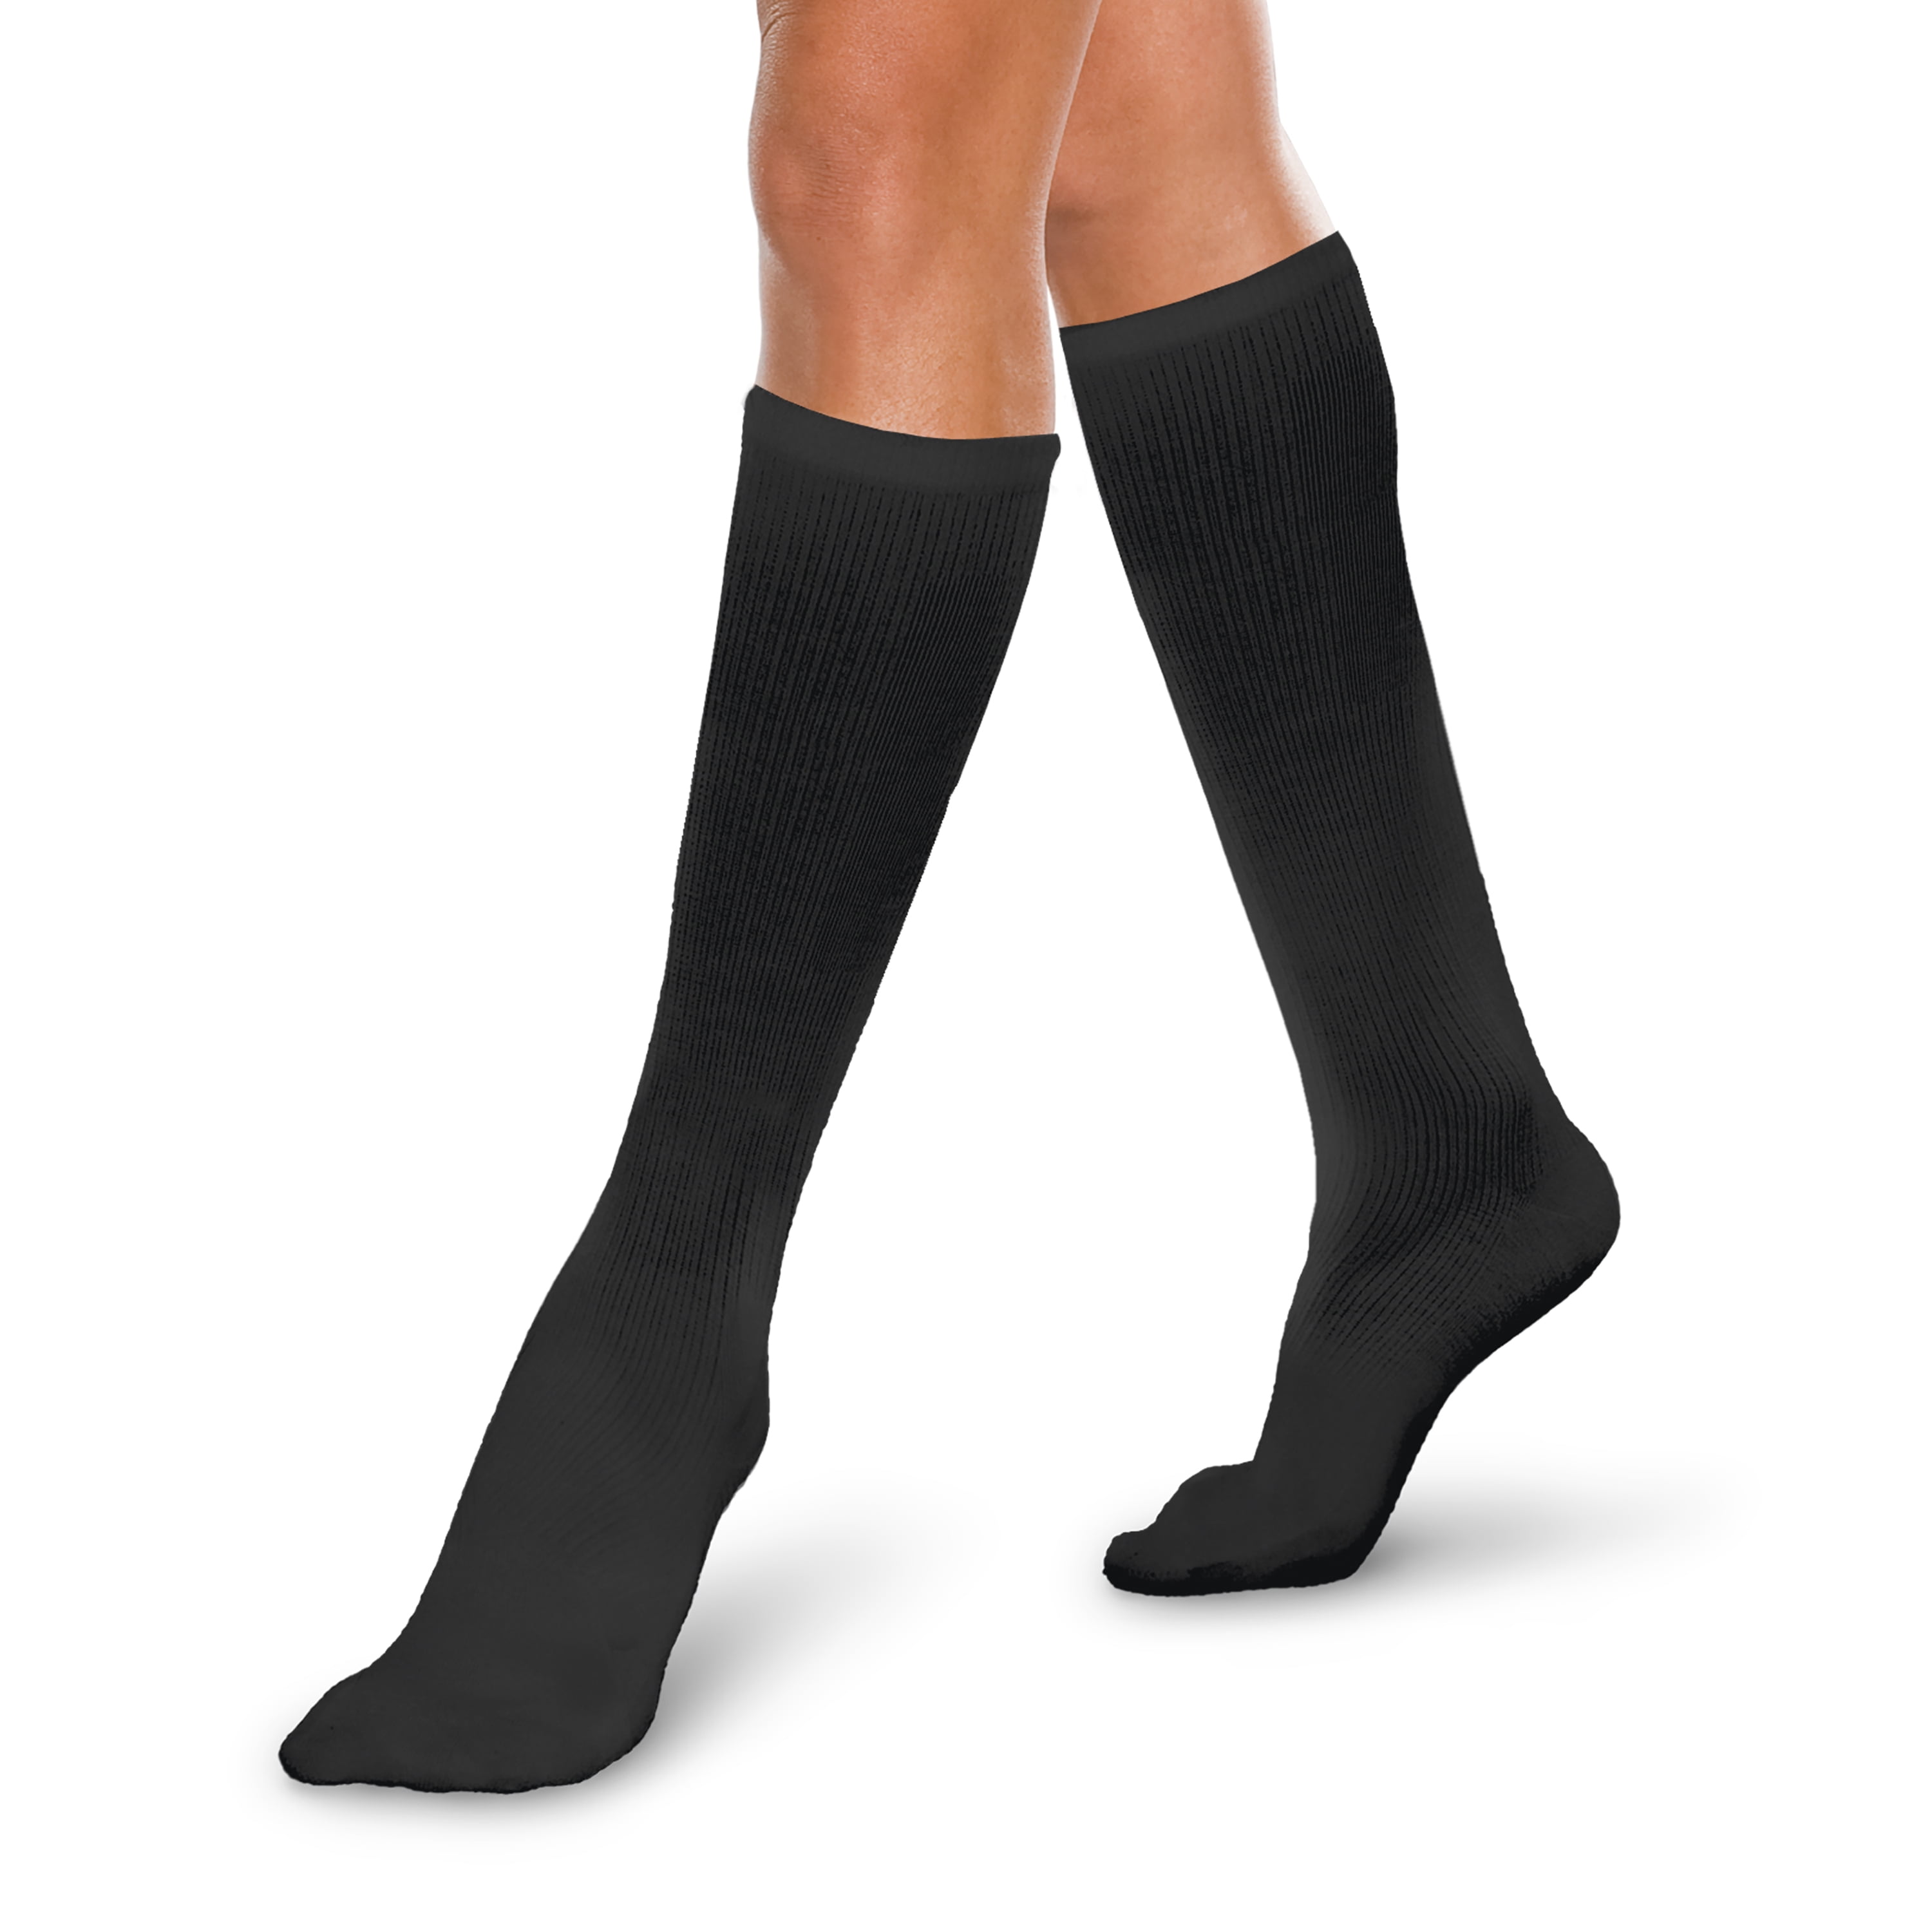 Compression socks review